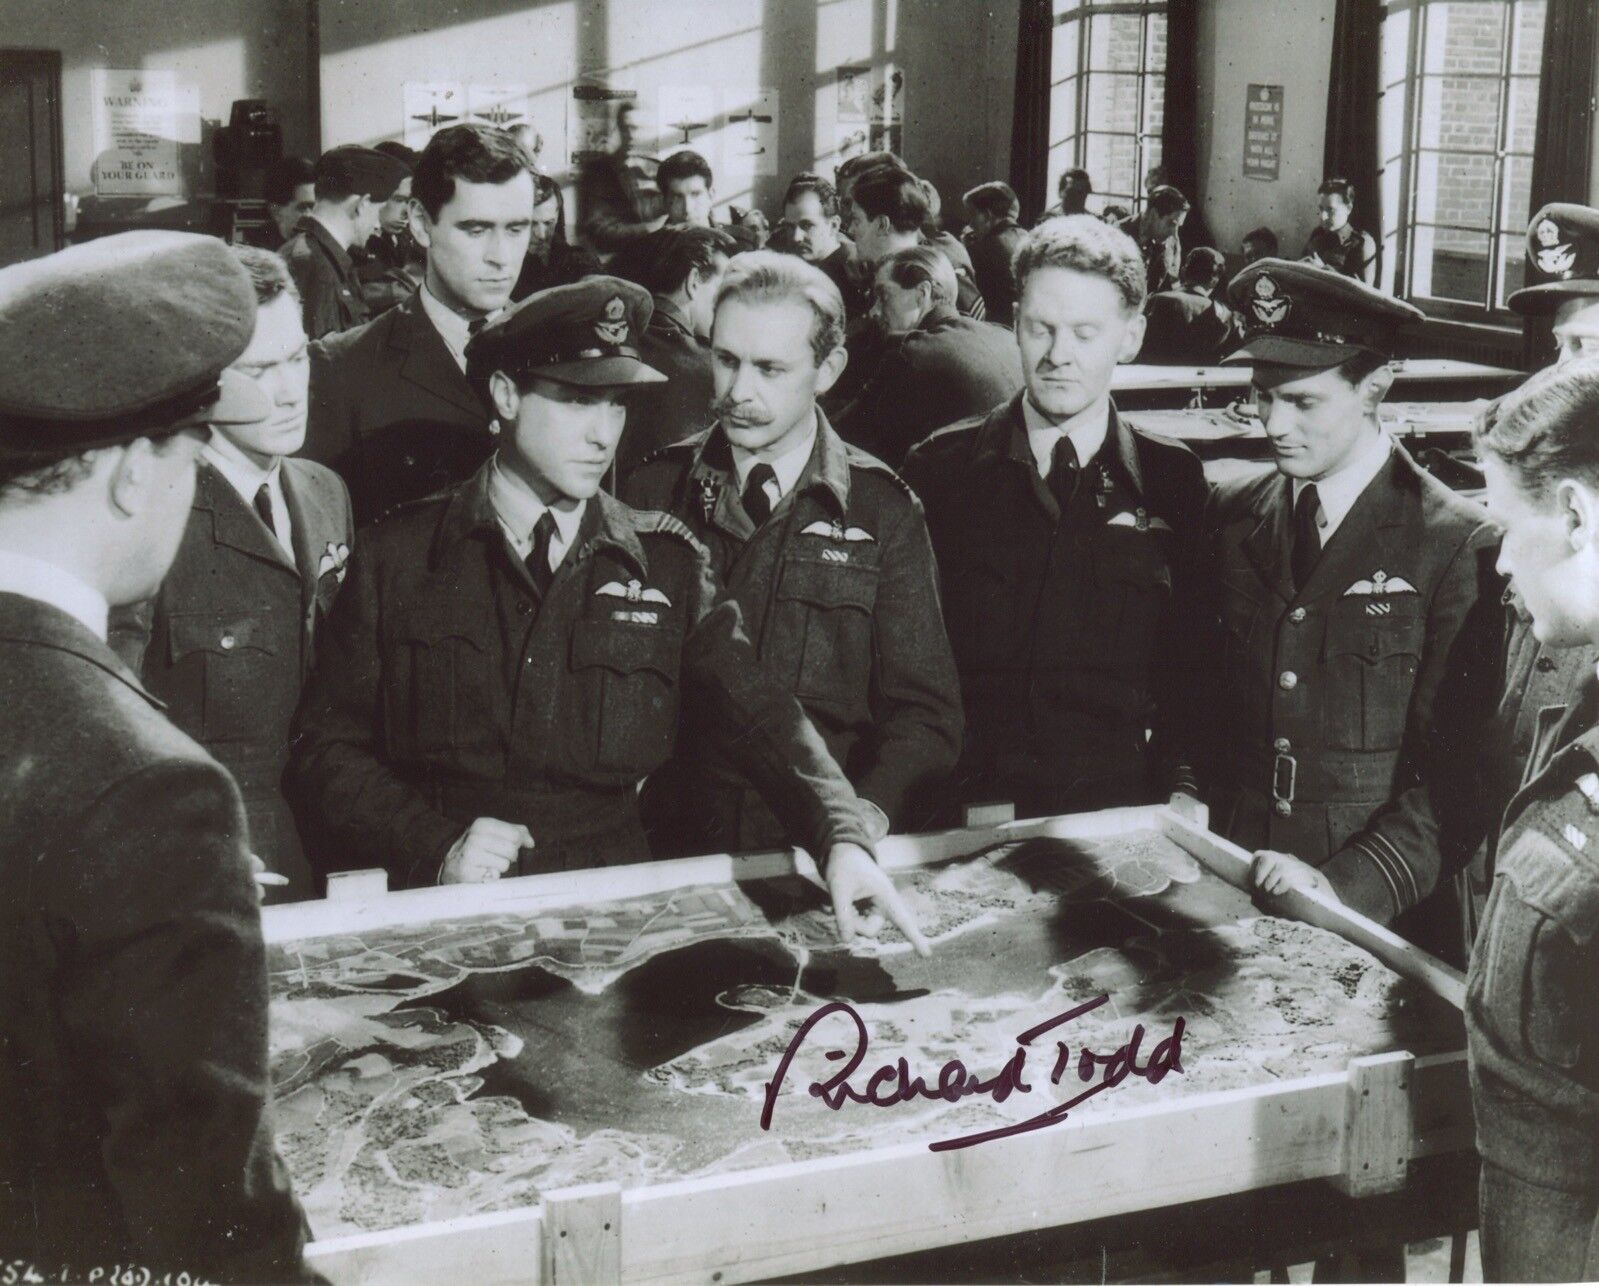 WW2 movie THE DAMBUSTERS 8x10 Photo Poster painting signed by Richard Todd UACC DEALER SIGNING